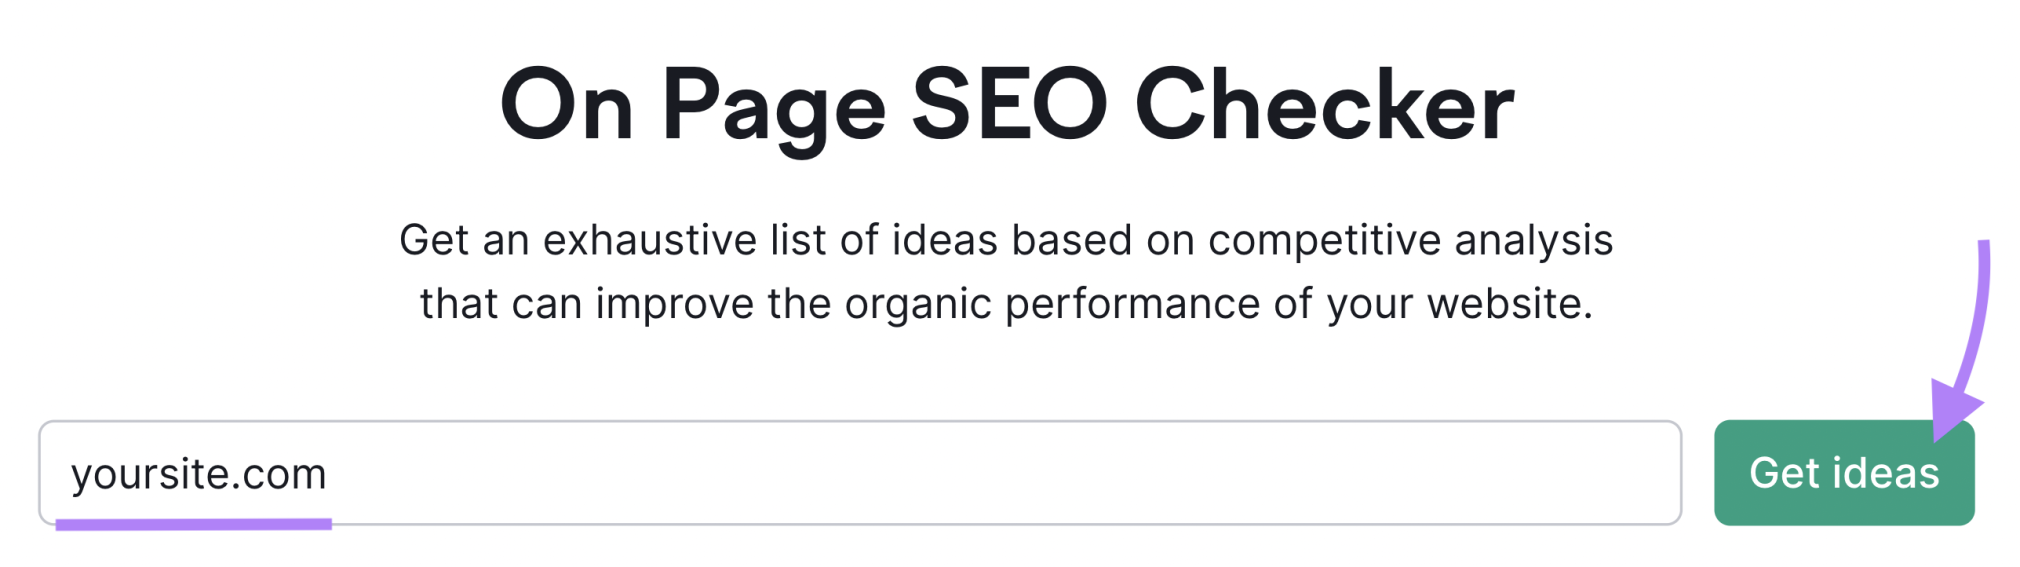 on page seo checker tool, checking your site for seo improvement ideas